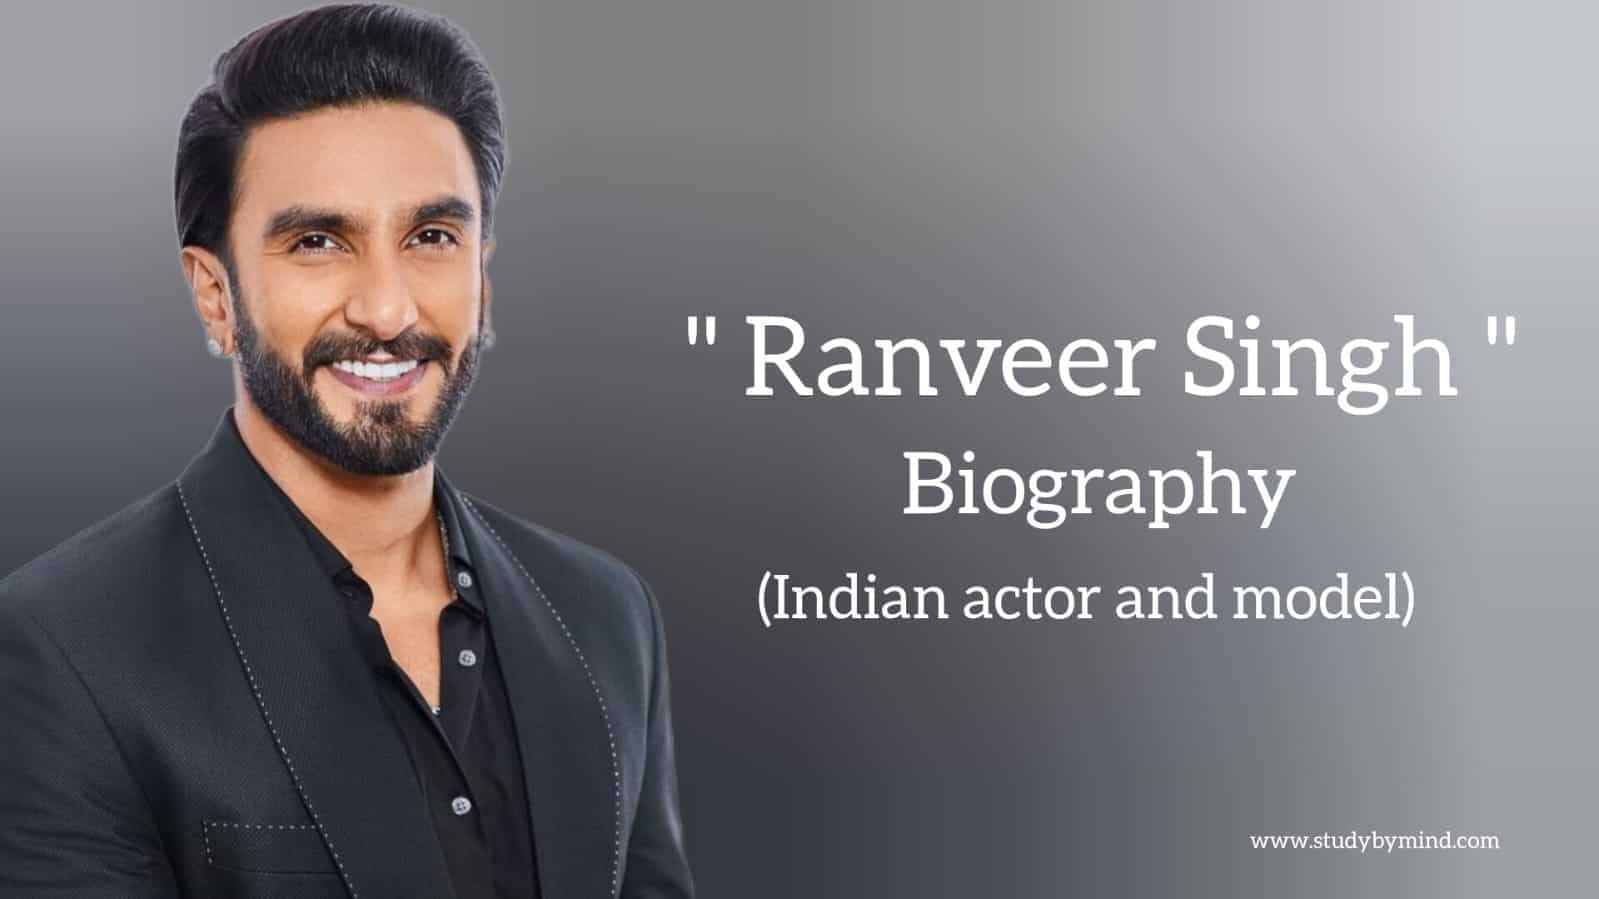 You are currently viewing Ranveer singh biography in english (Indian actor)